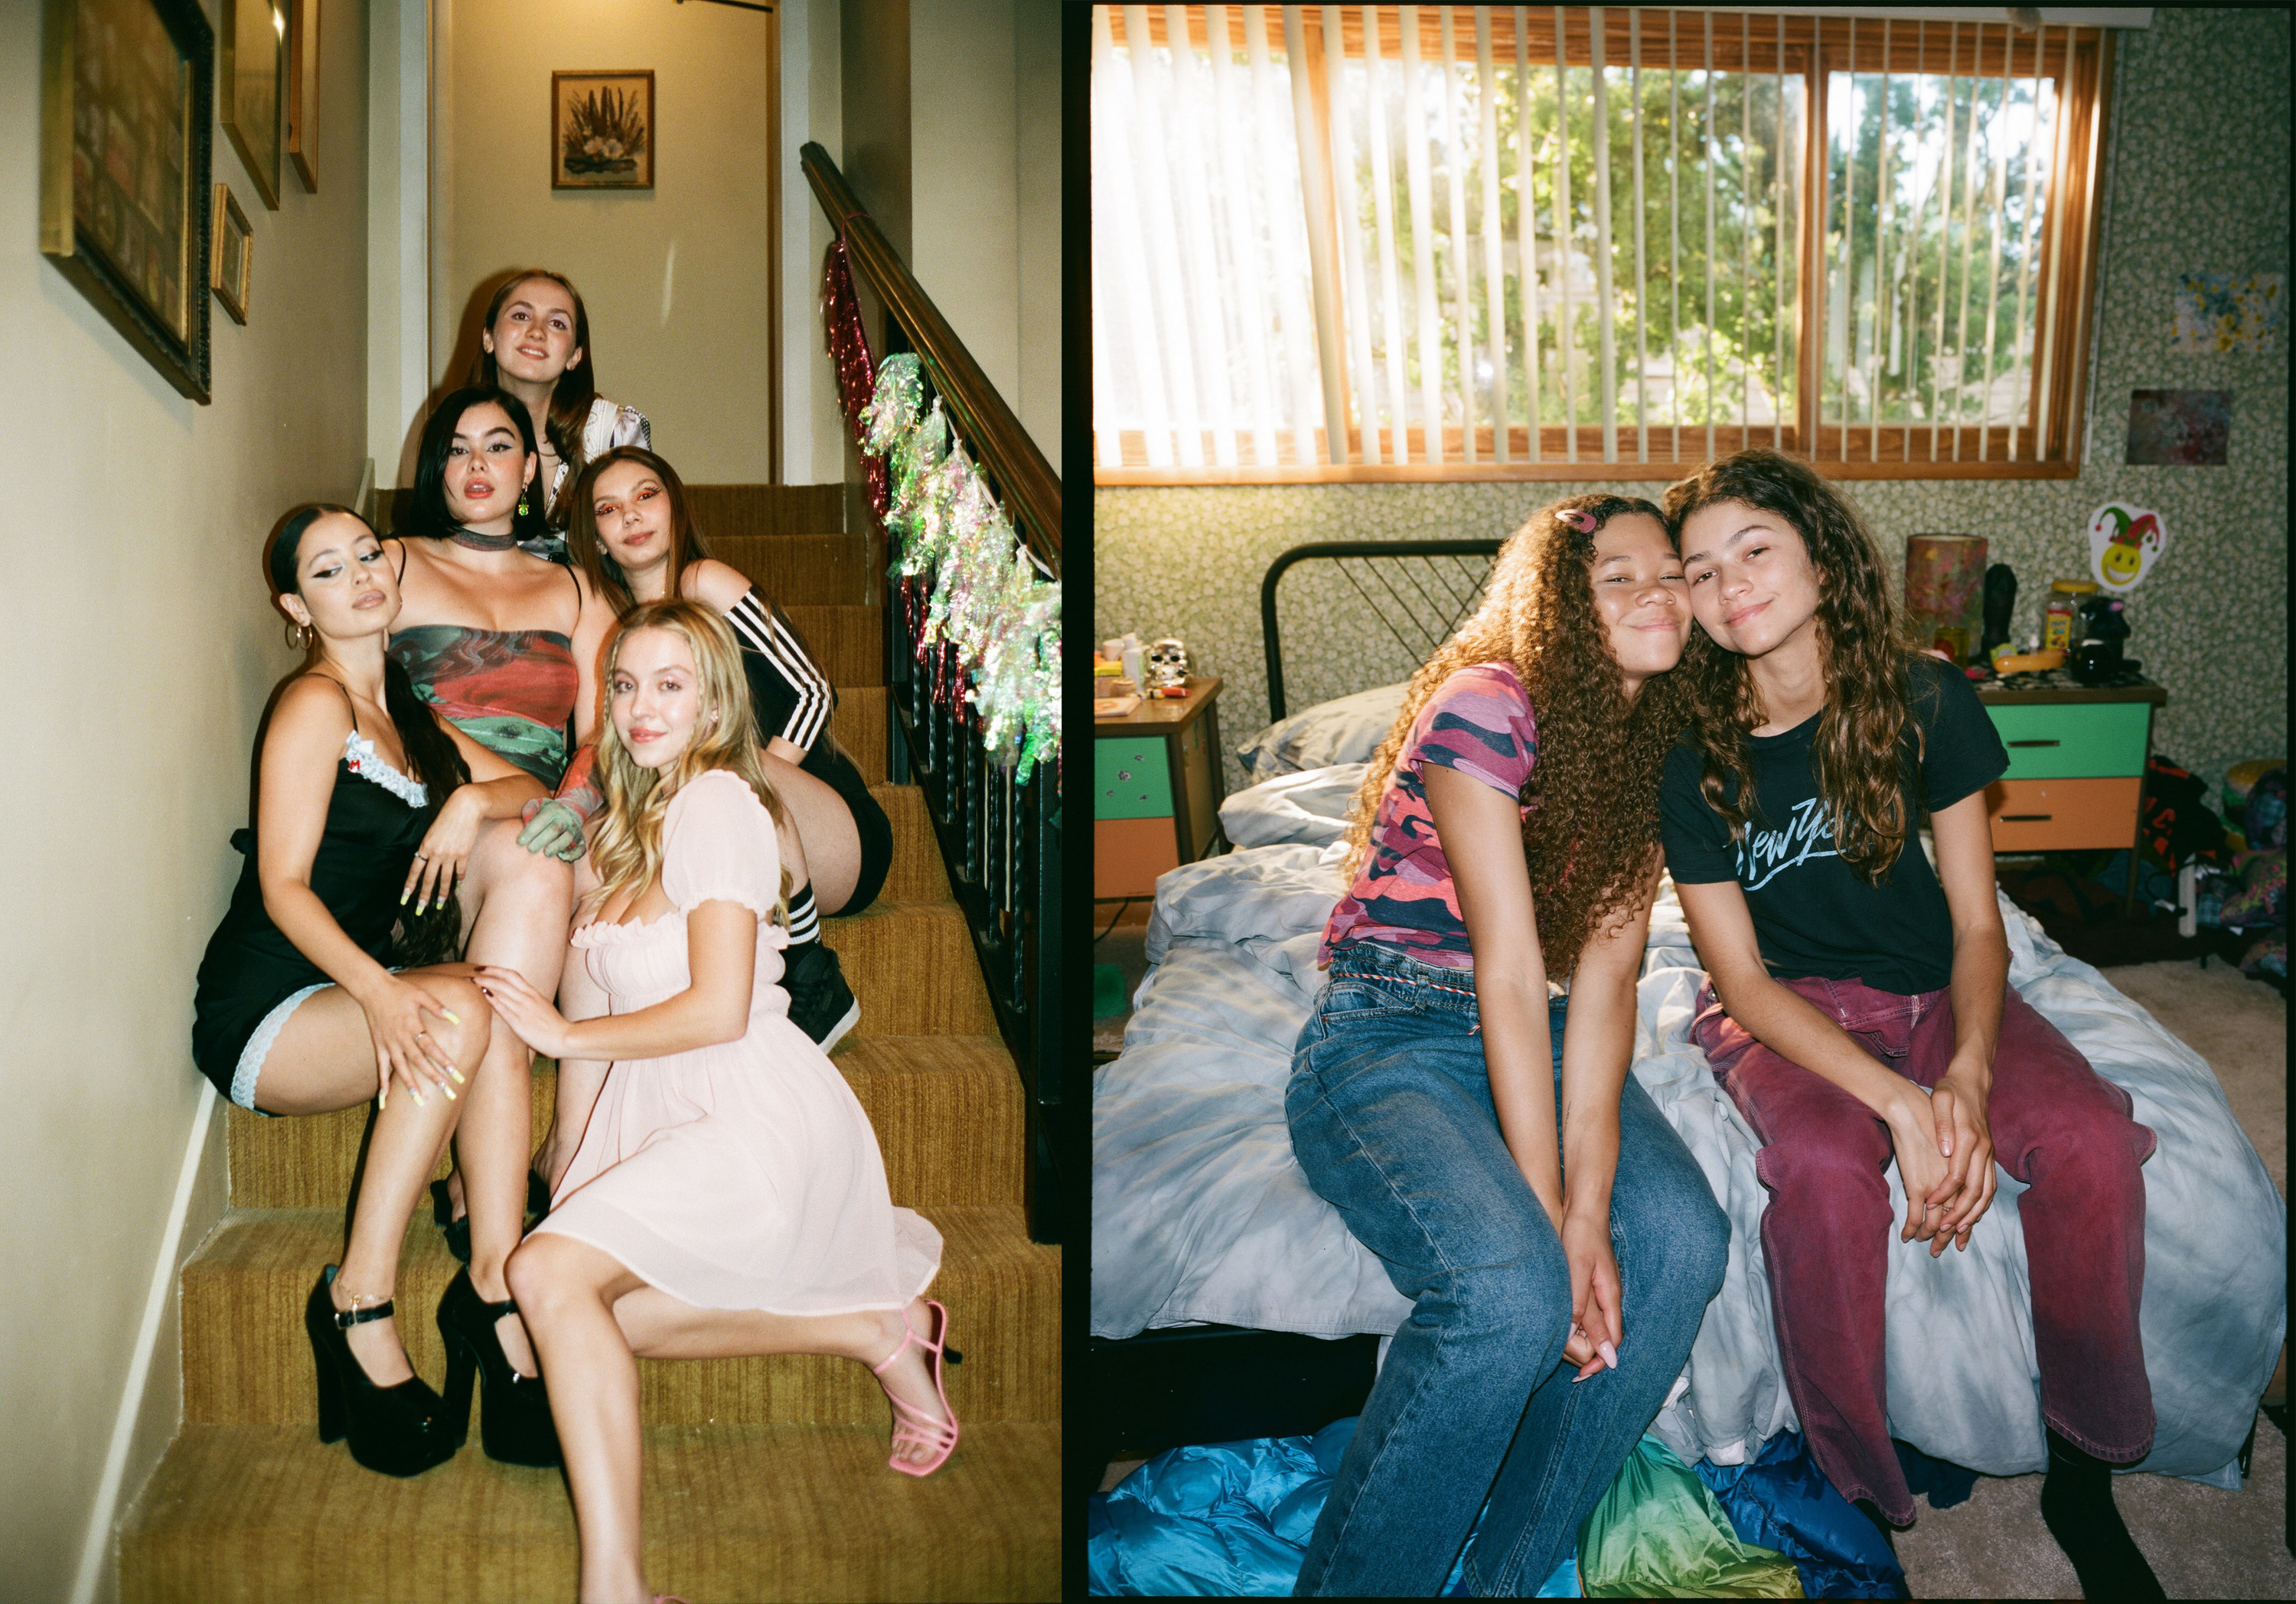 Left from top, Maude Apatow, Barbie Ferreira, Sophia Rose Wilson, Alexa Demie, and Sydney Sweeney on set. Right, Storm Reid as Gia and Zendaya as Rue on set